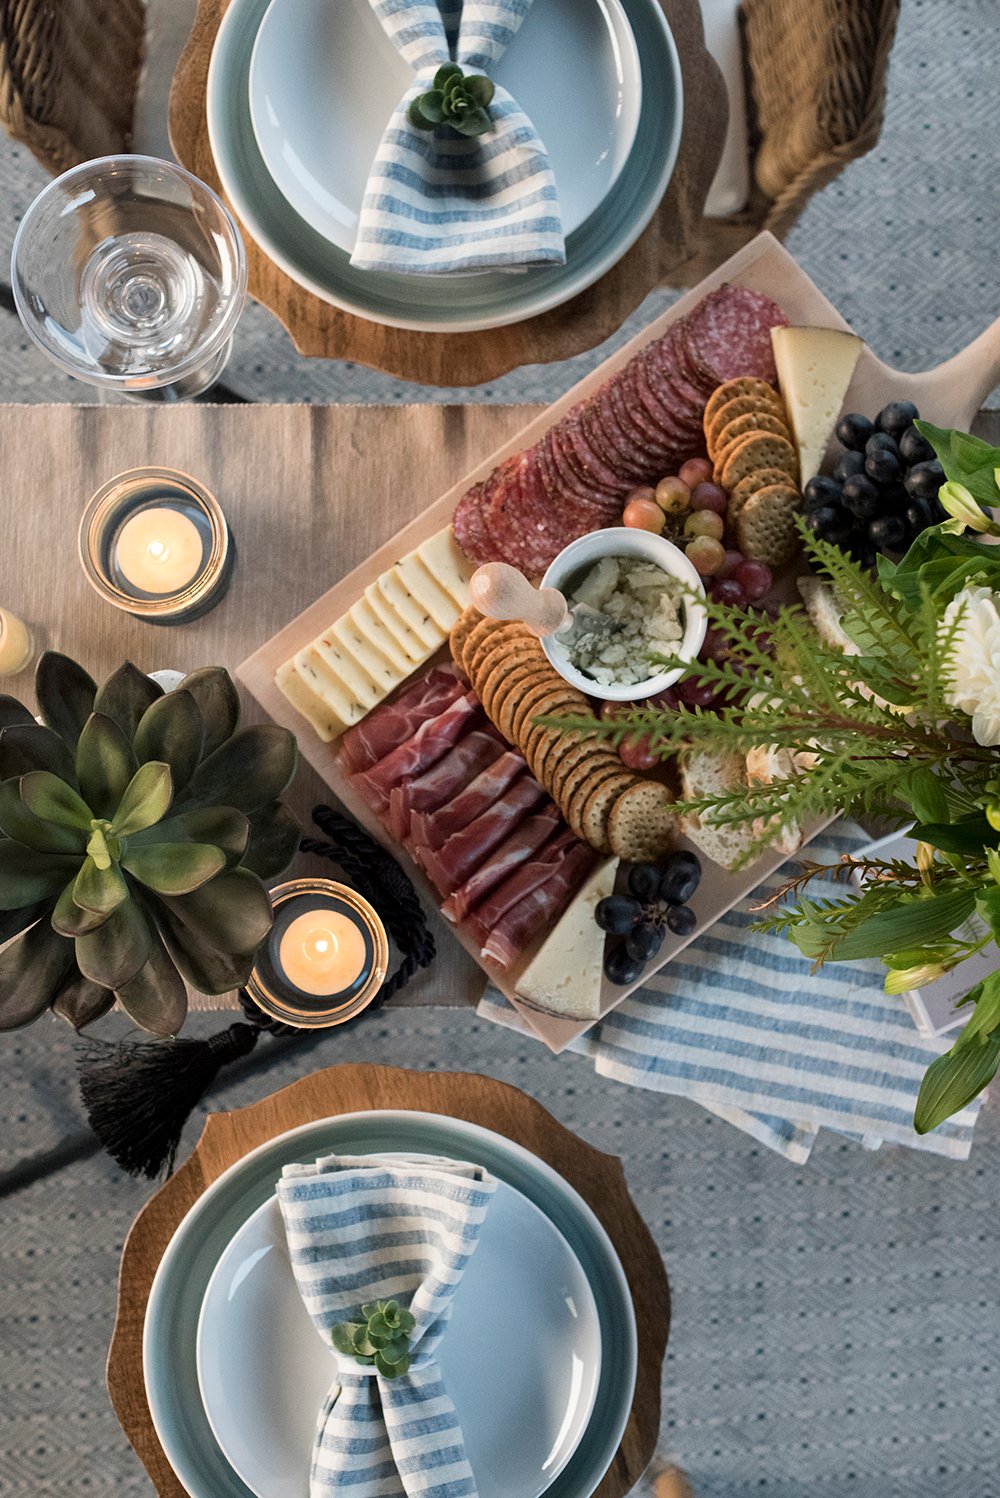 Outdoor Entertaining Essentials for Spring and Summer - roomfortuesday.com